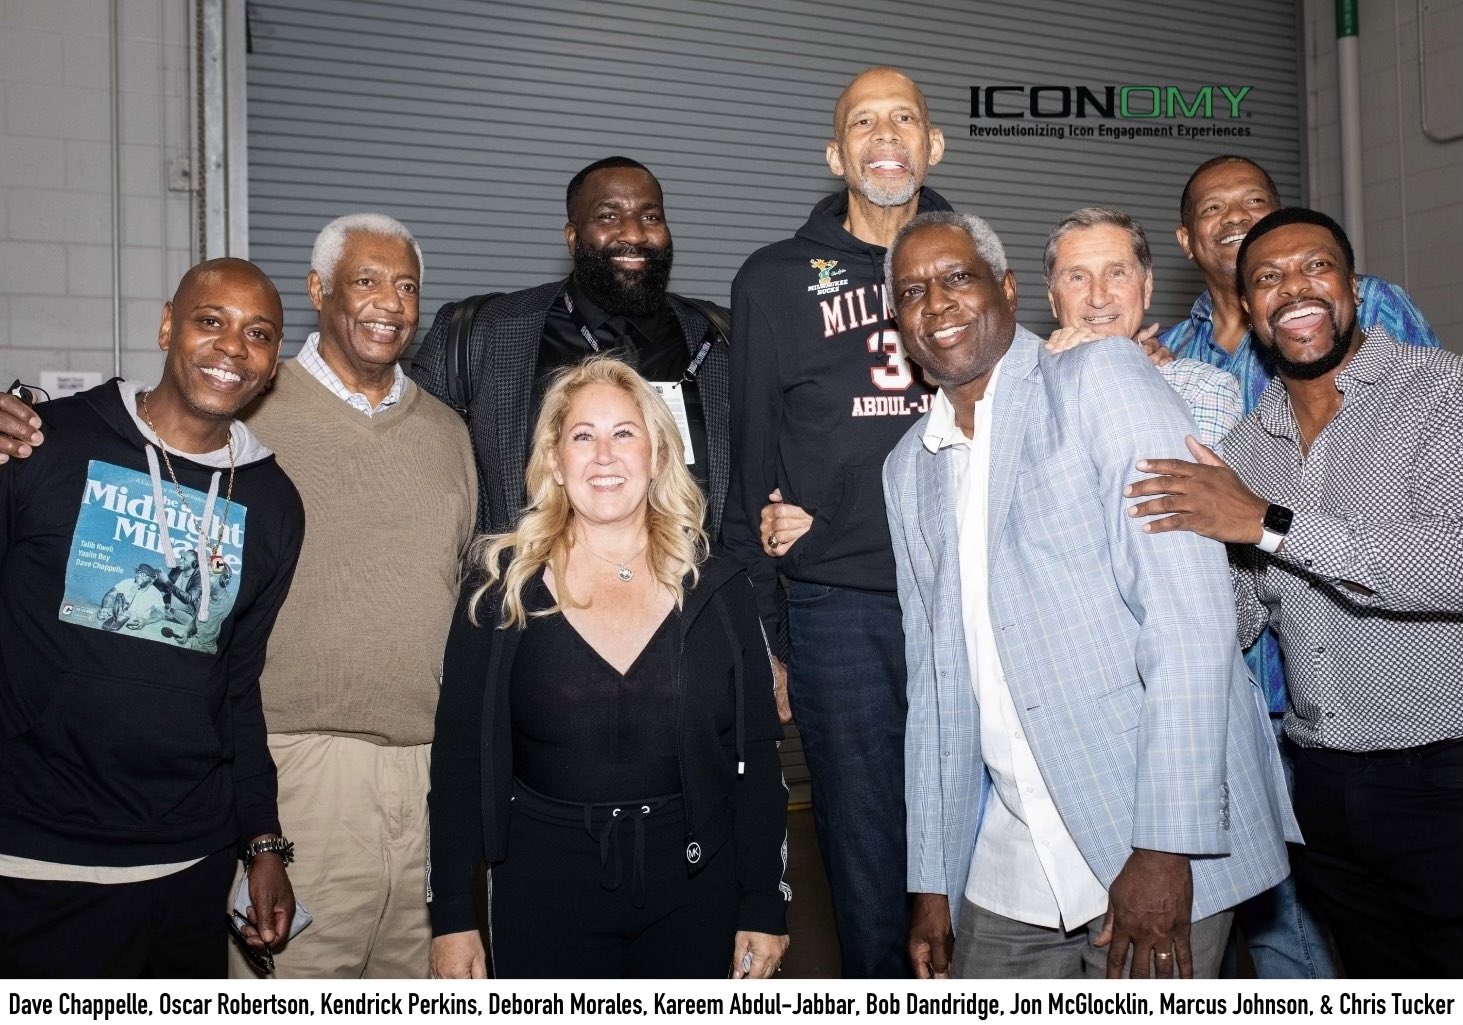 Kareem Abdul-Jabbar on X: Hanging out at the Chicago sports spectacular  with Magic & my Manager Deborah Morales  / X